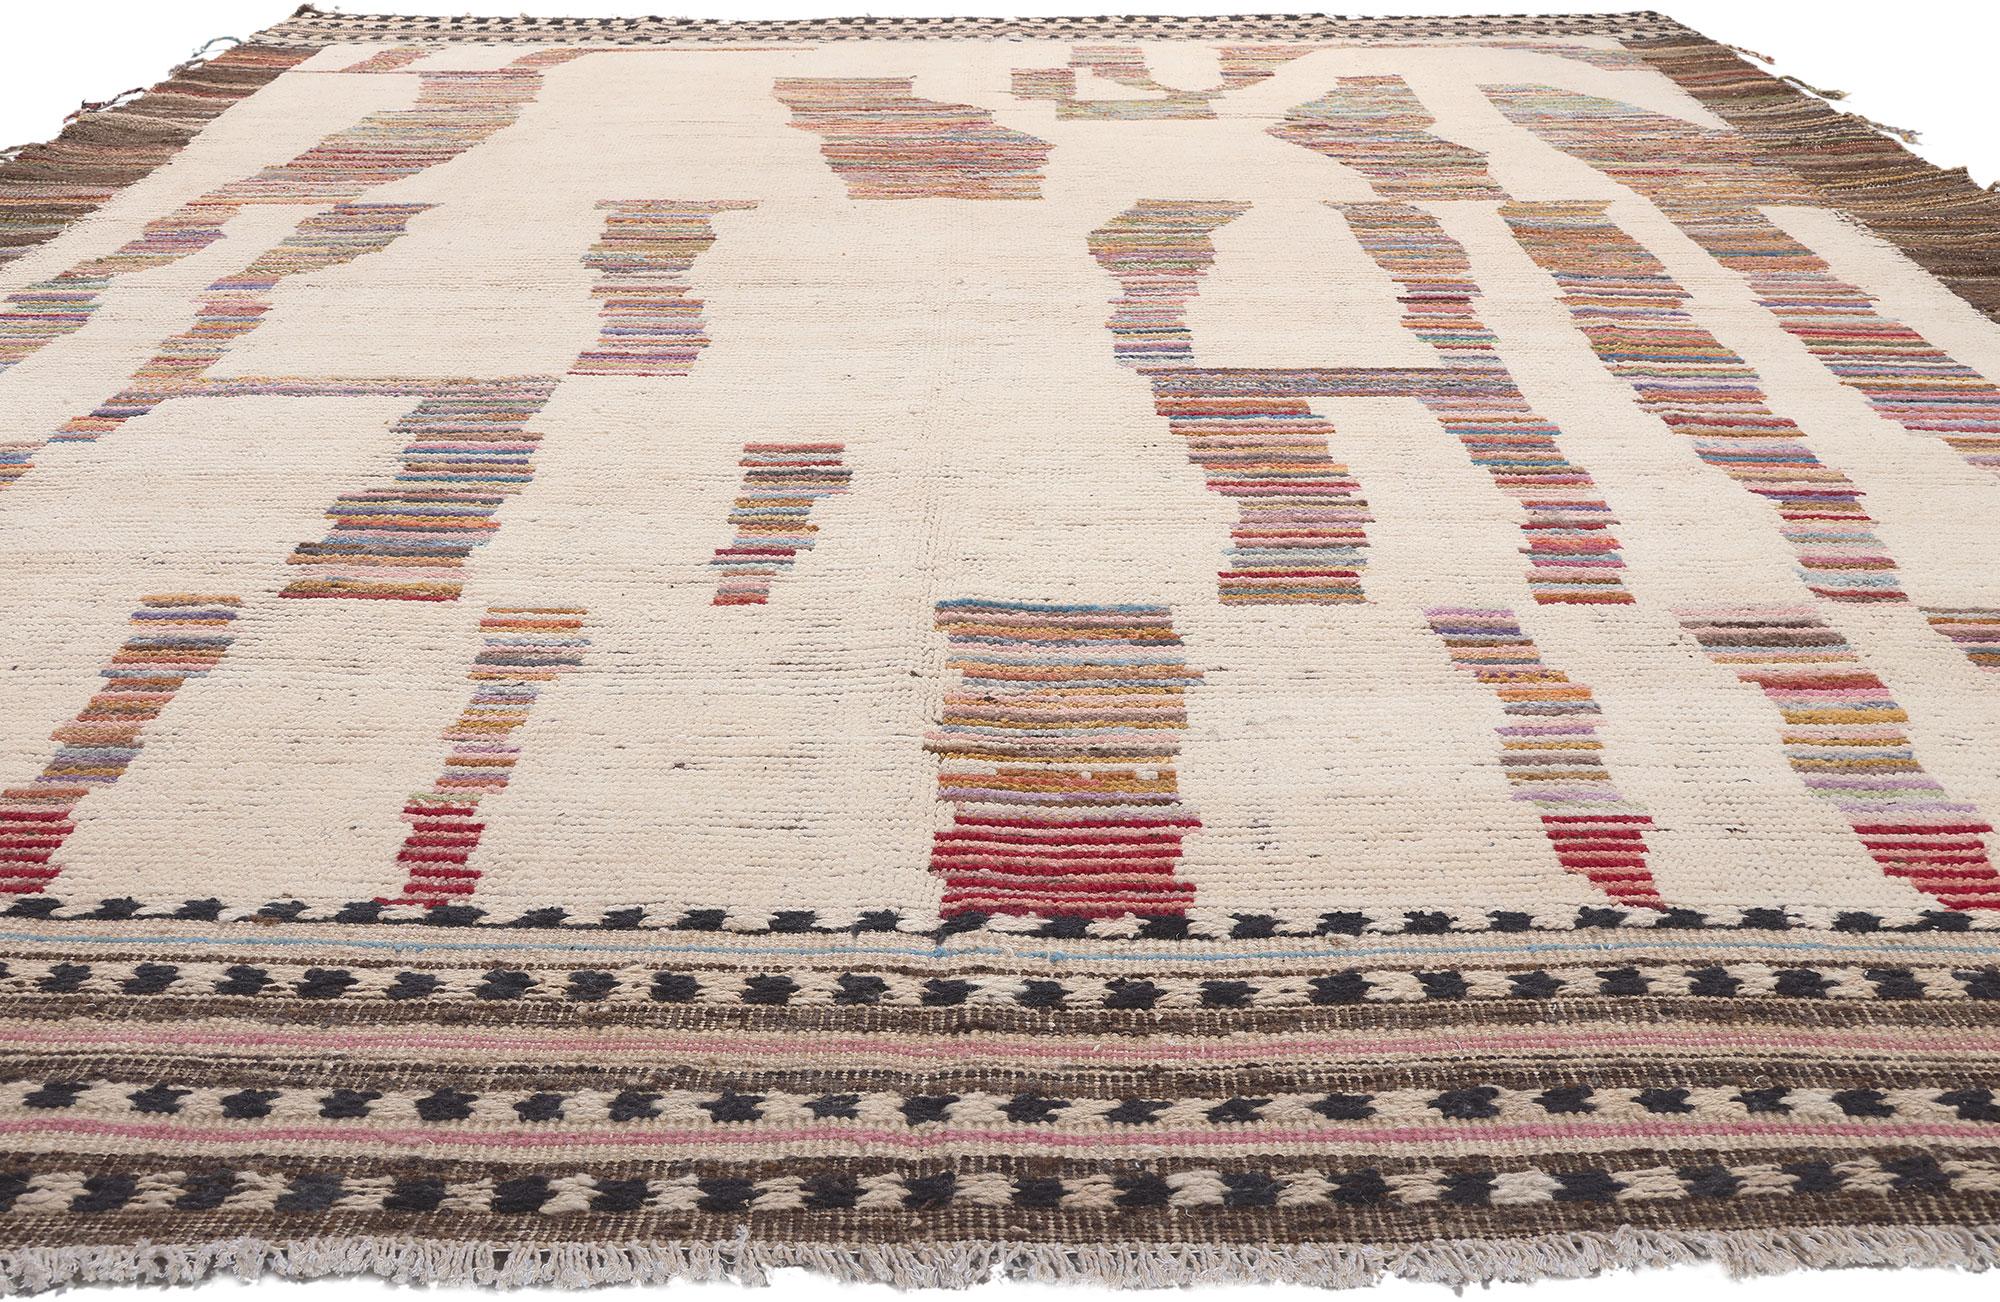 Pakistani Large Modern Moroccan Area Rug with Short Pile and Earth-Tone Colors For Sale